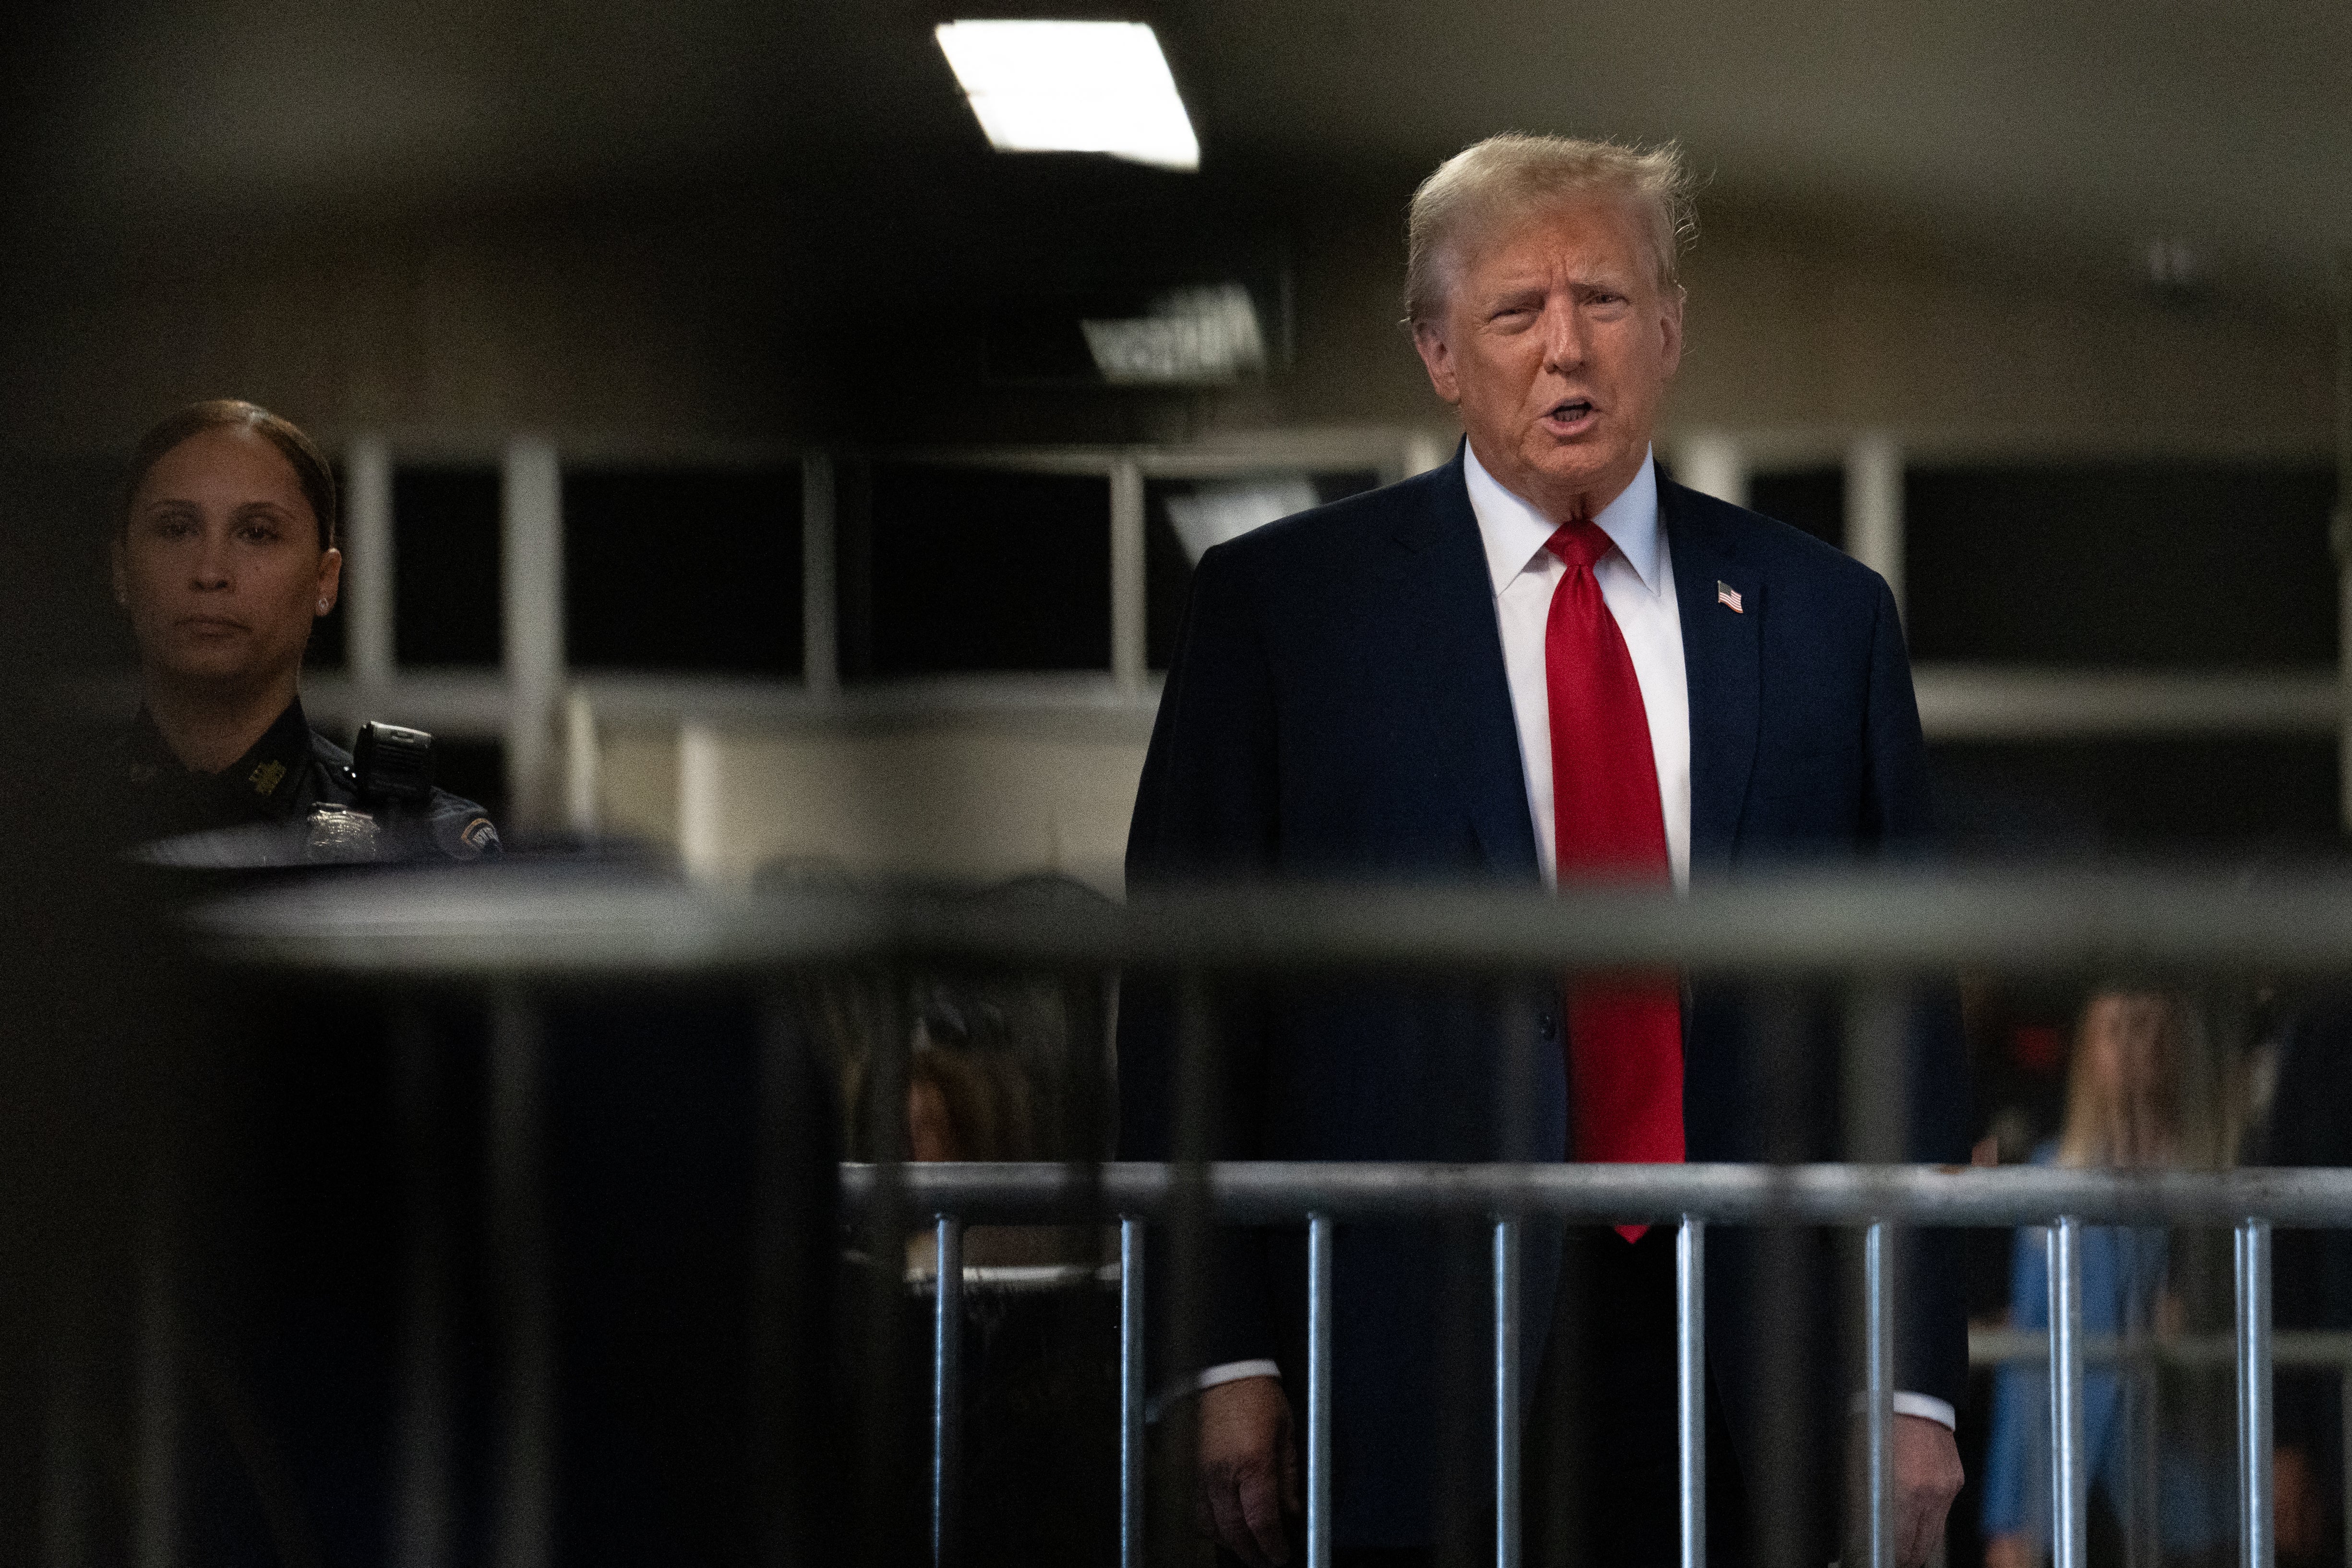 Donald Trump speaks to reporters in a Manhattan criminal court hallway on 25 April